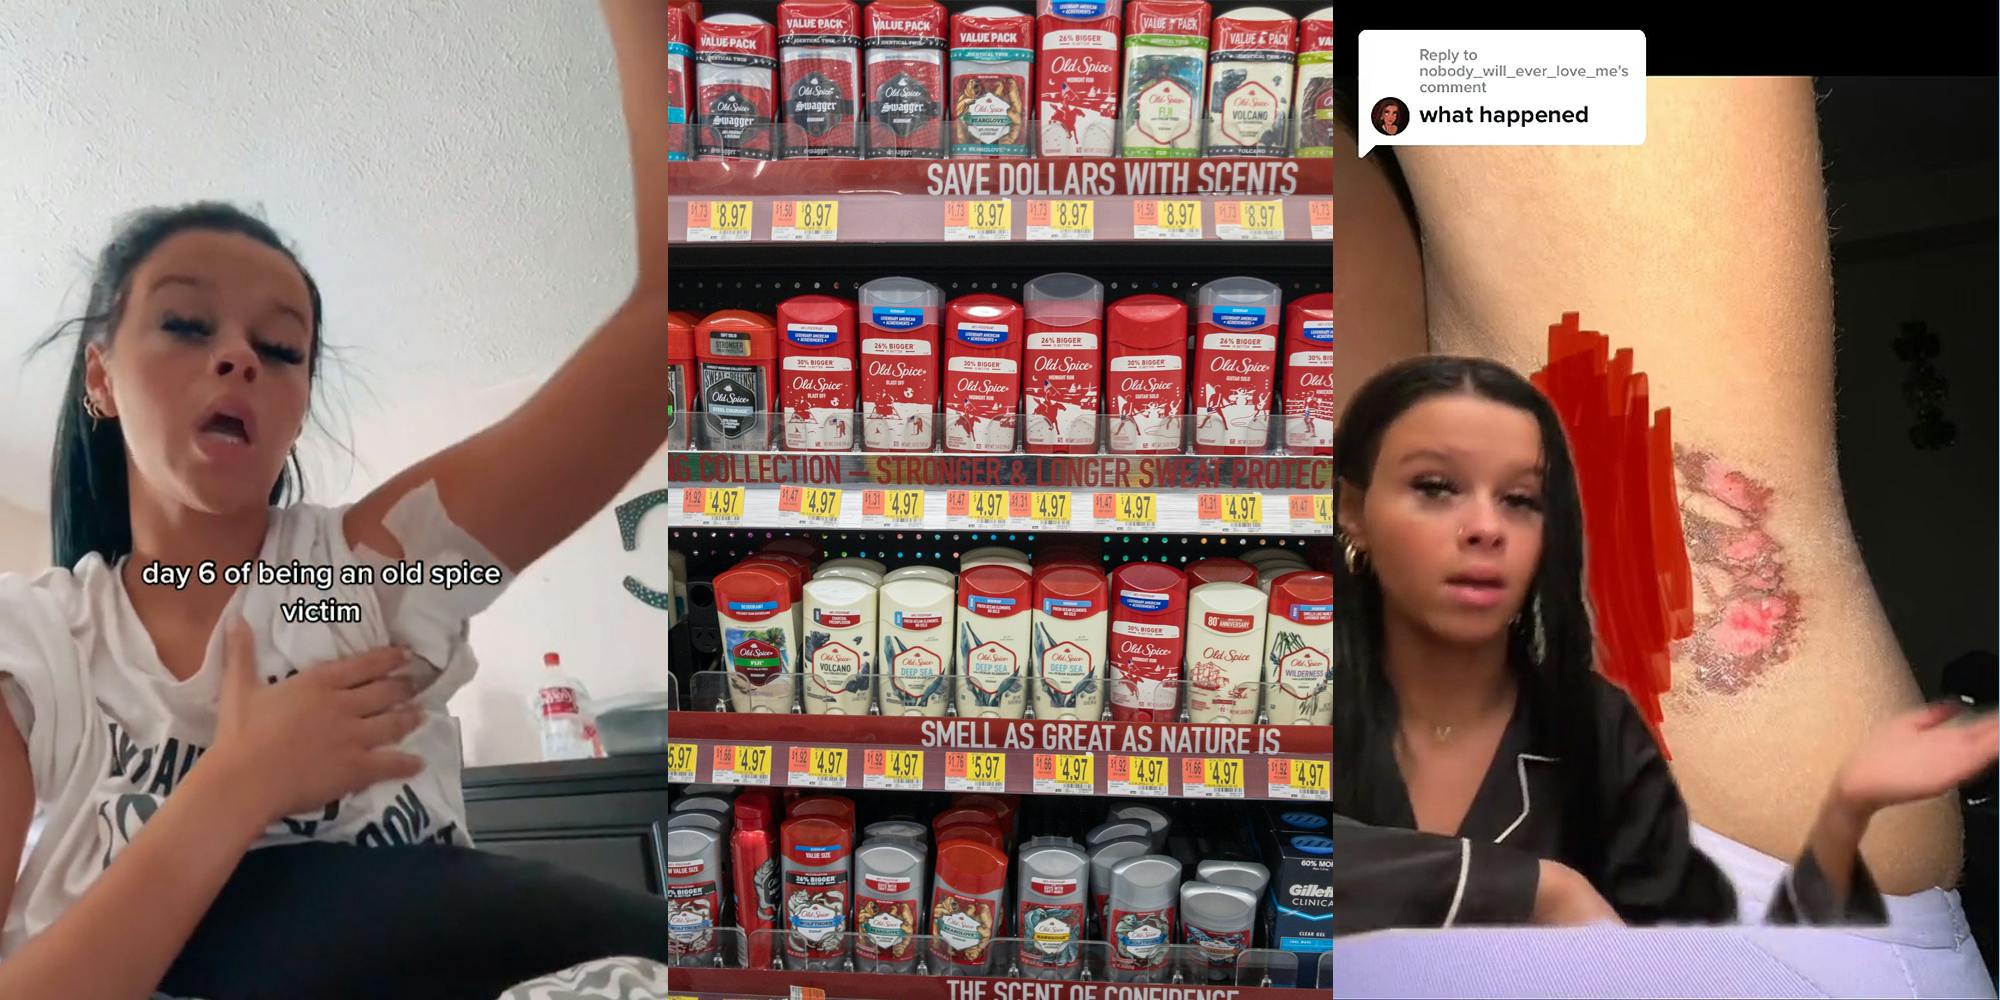 Woman Says Old Spice Deodorant Gave Her Chemical Burns